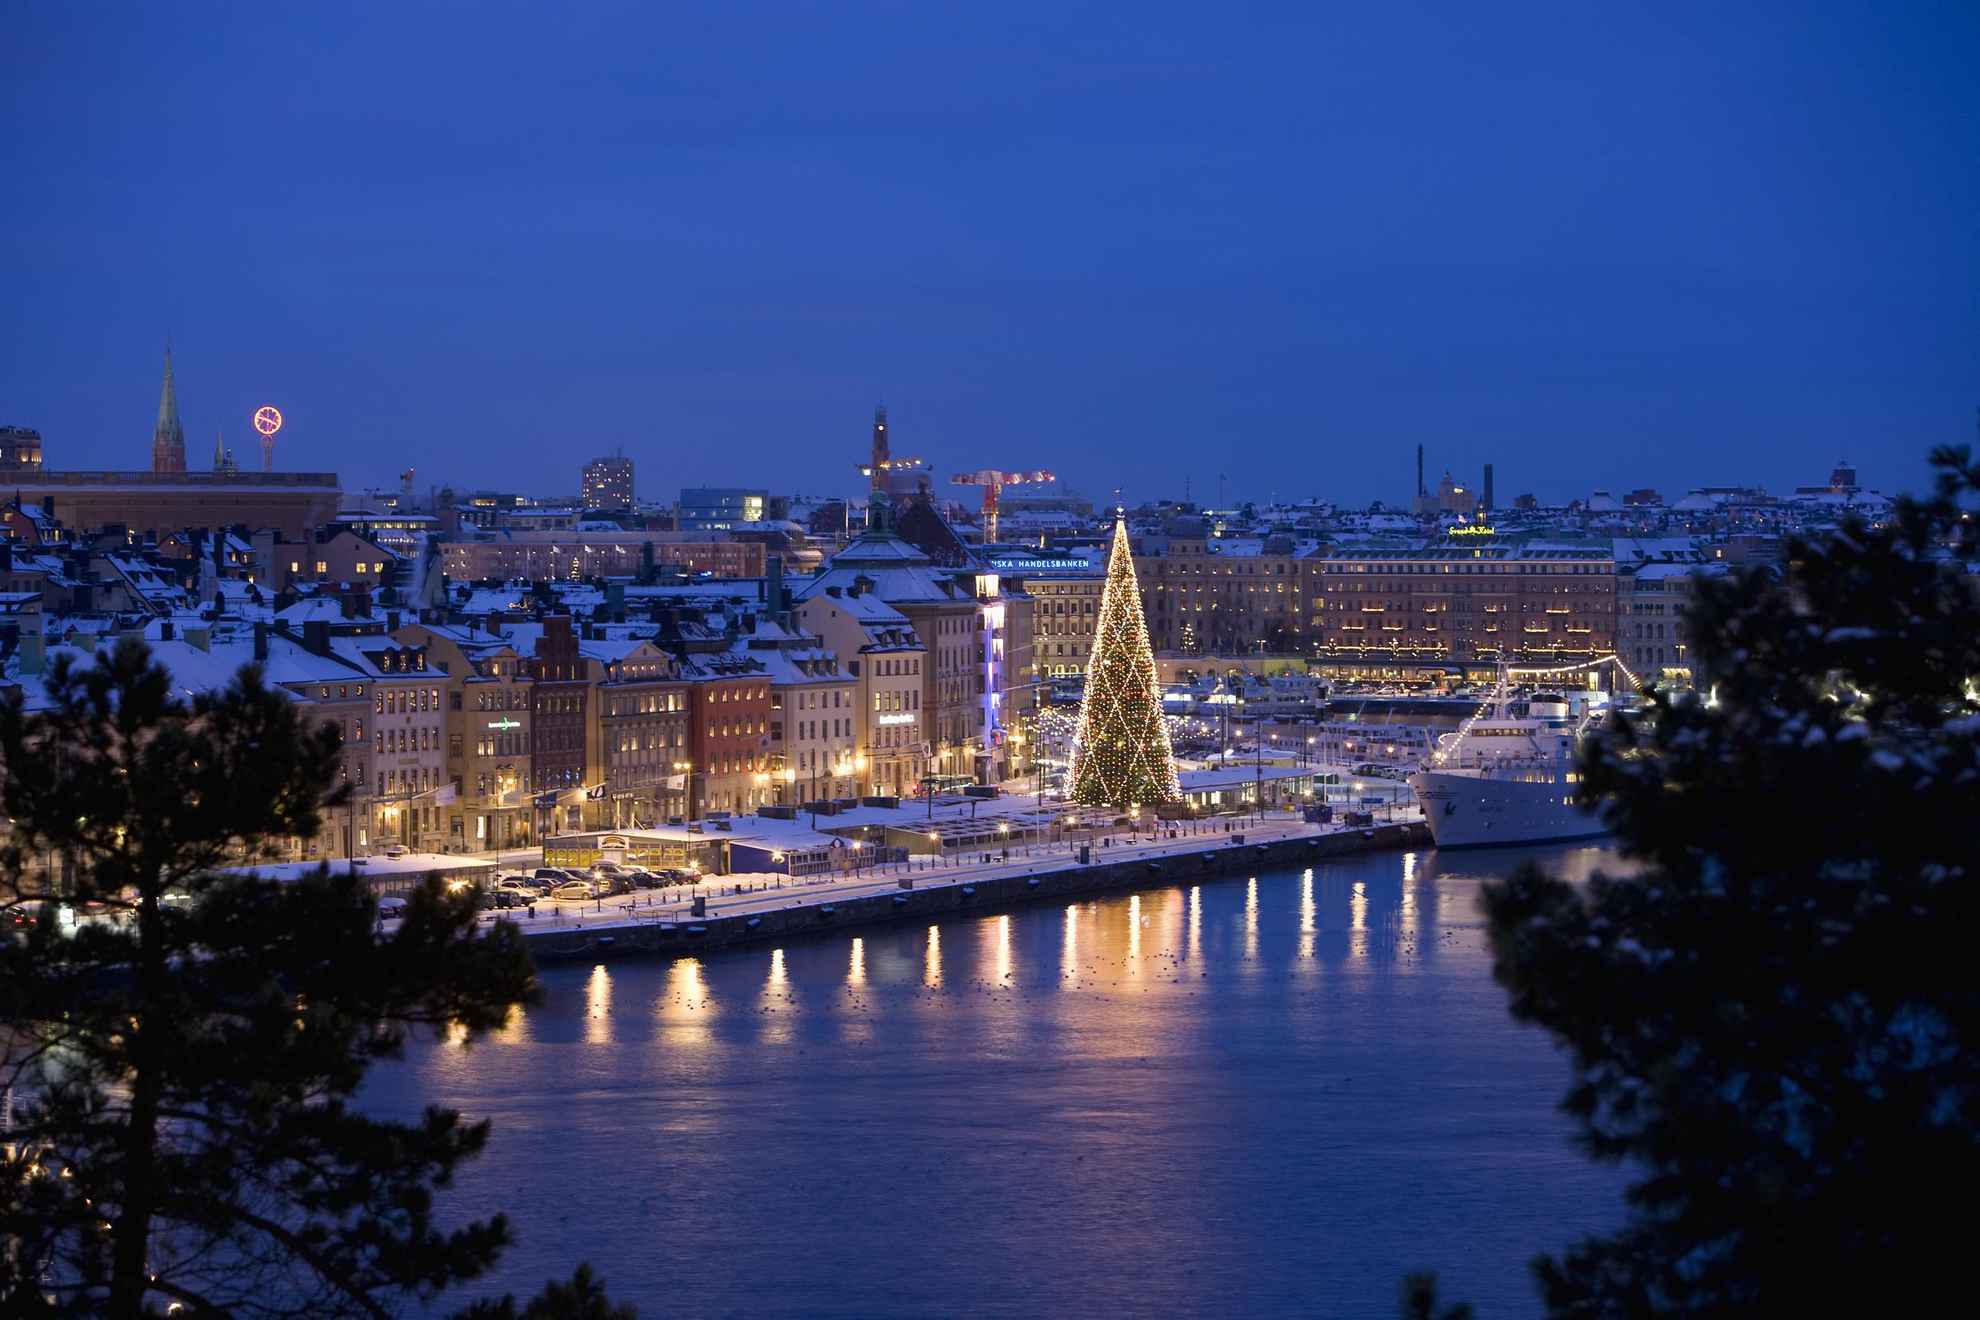 Stockholm during Christmas